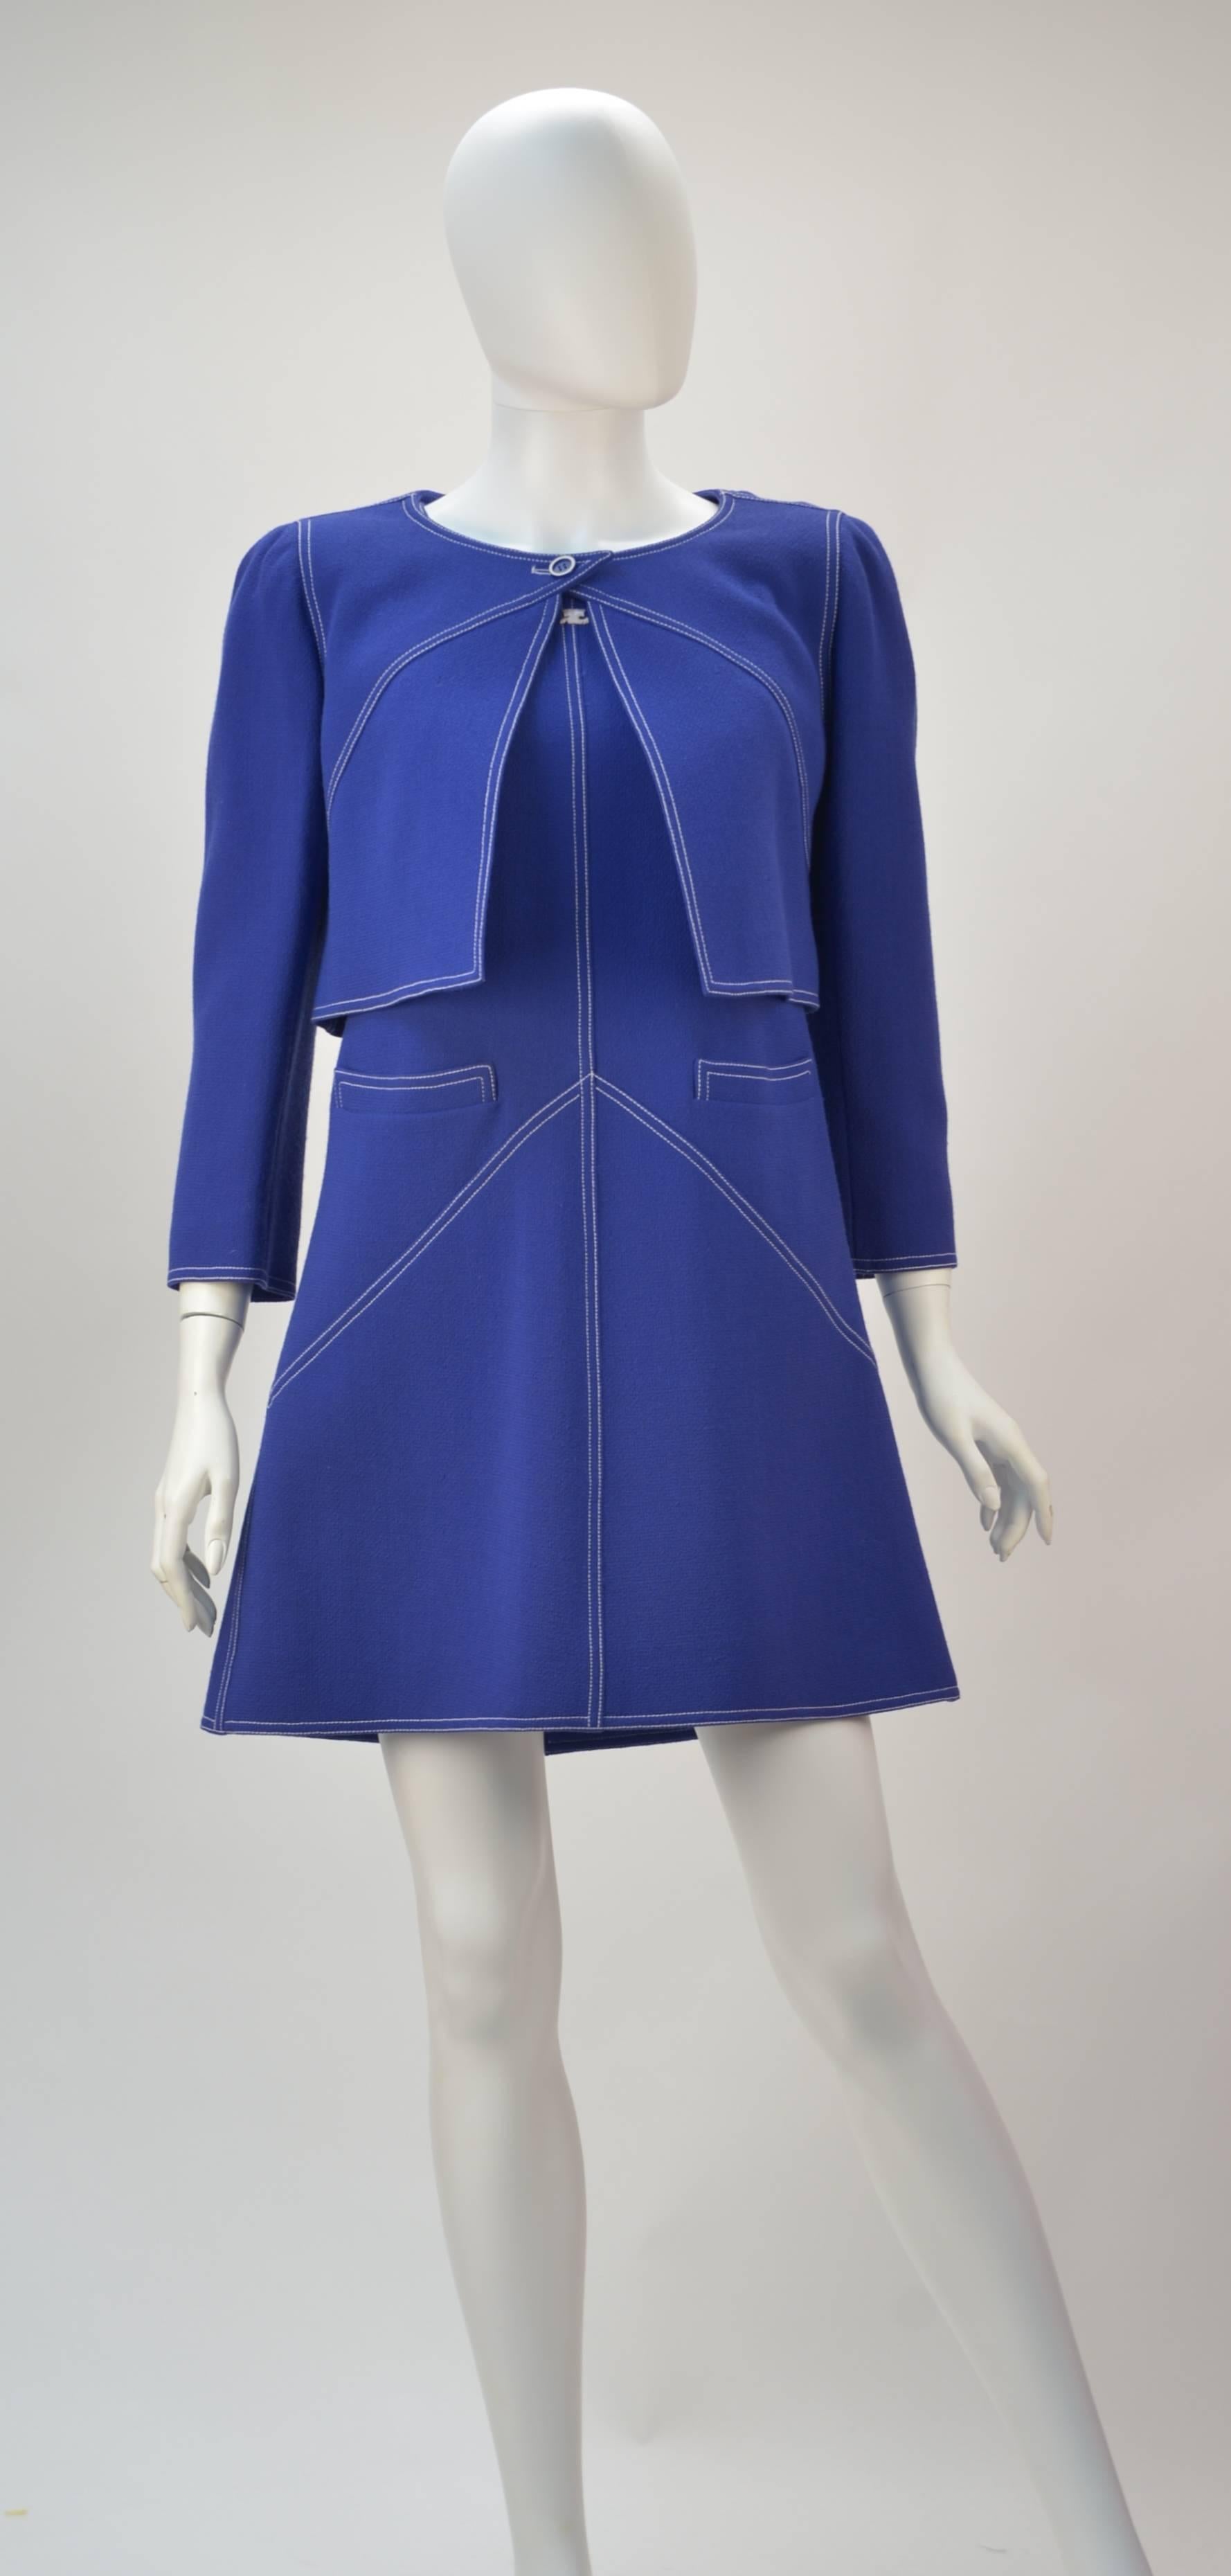 Very mod yet so now comes this Courreges wool ensemble (See Jacket Pictured Below). The color is absolutely beautiful... it is blue and it is purple.*  

The sleeveless dress has the Courreges signature logo at center front neck and strategically